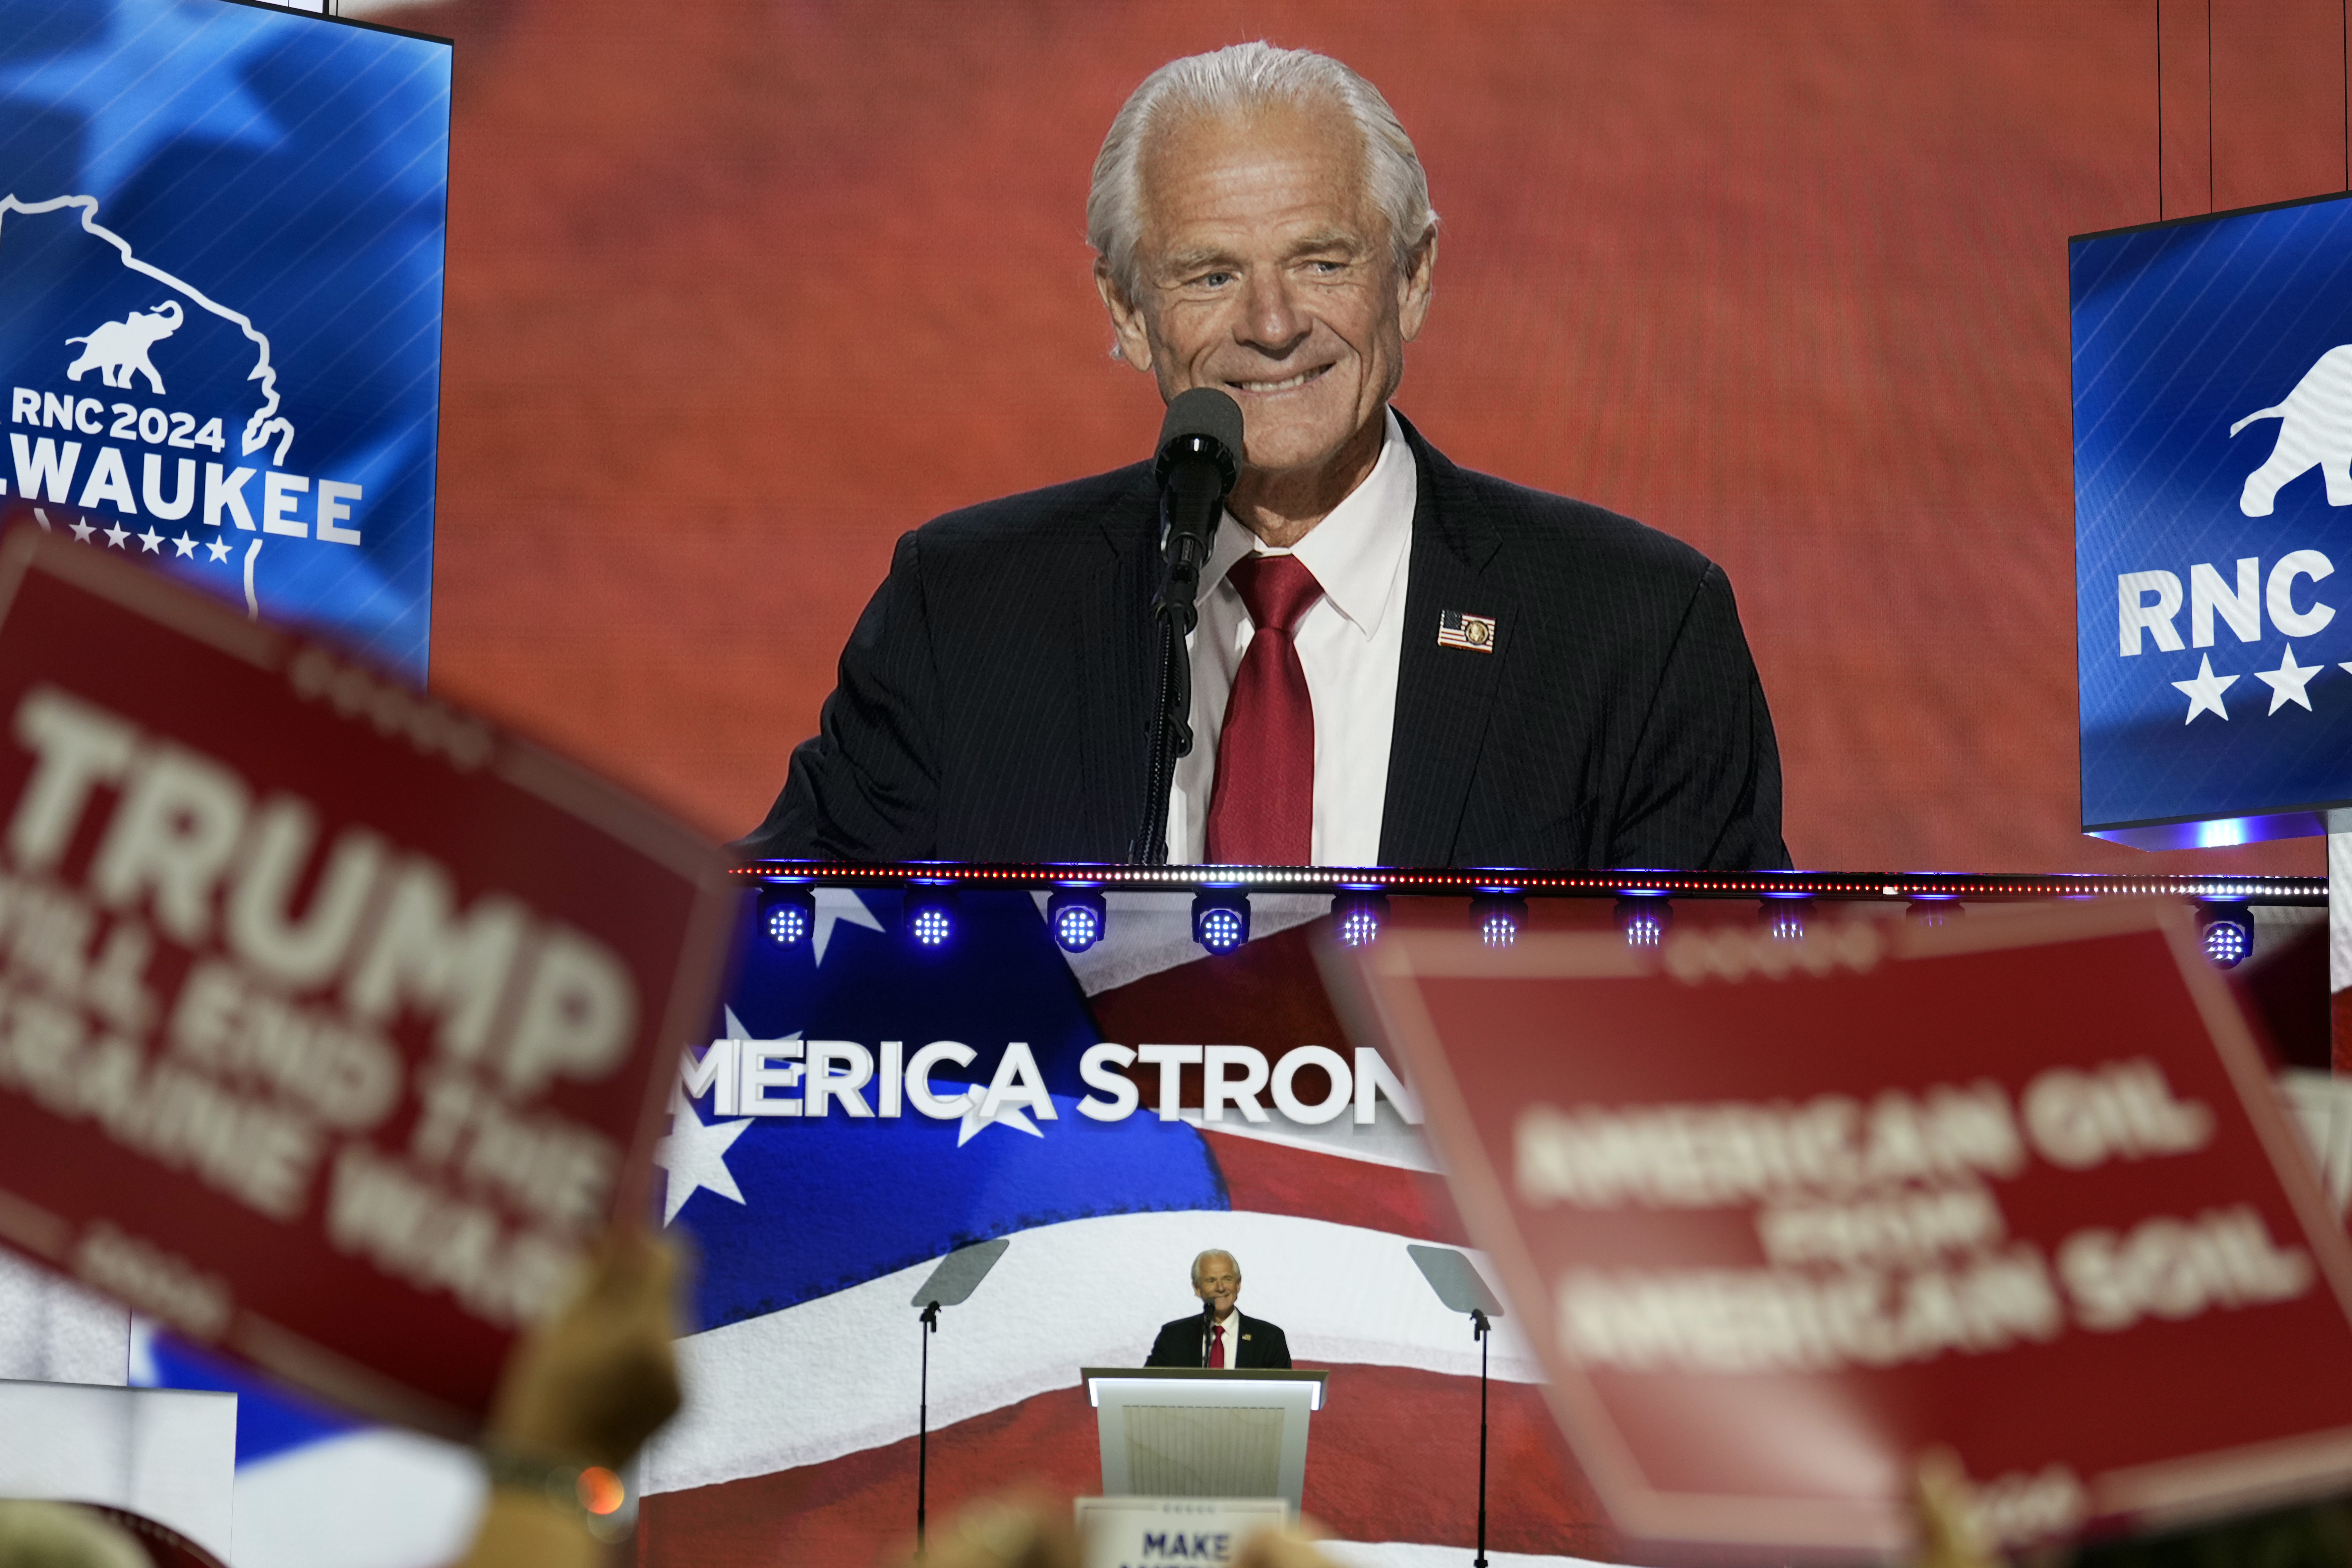 Peter Navarro, former Director of U.S. Office of Trade & Manufacturing. speaks during the third day of 2024 Republican National Convention at the Fiserv Forum, Wednesday, July 17, 2024, in Milwaukee. (AP Photo/Carolyn Kaster)